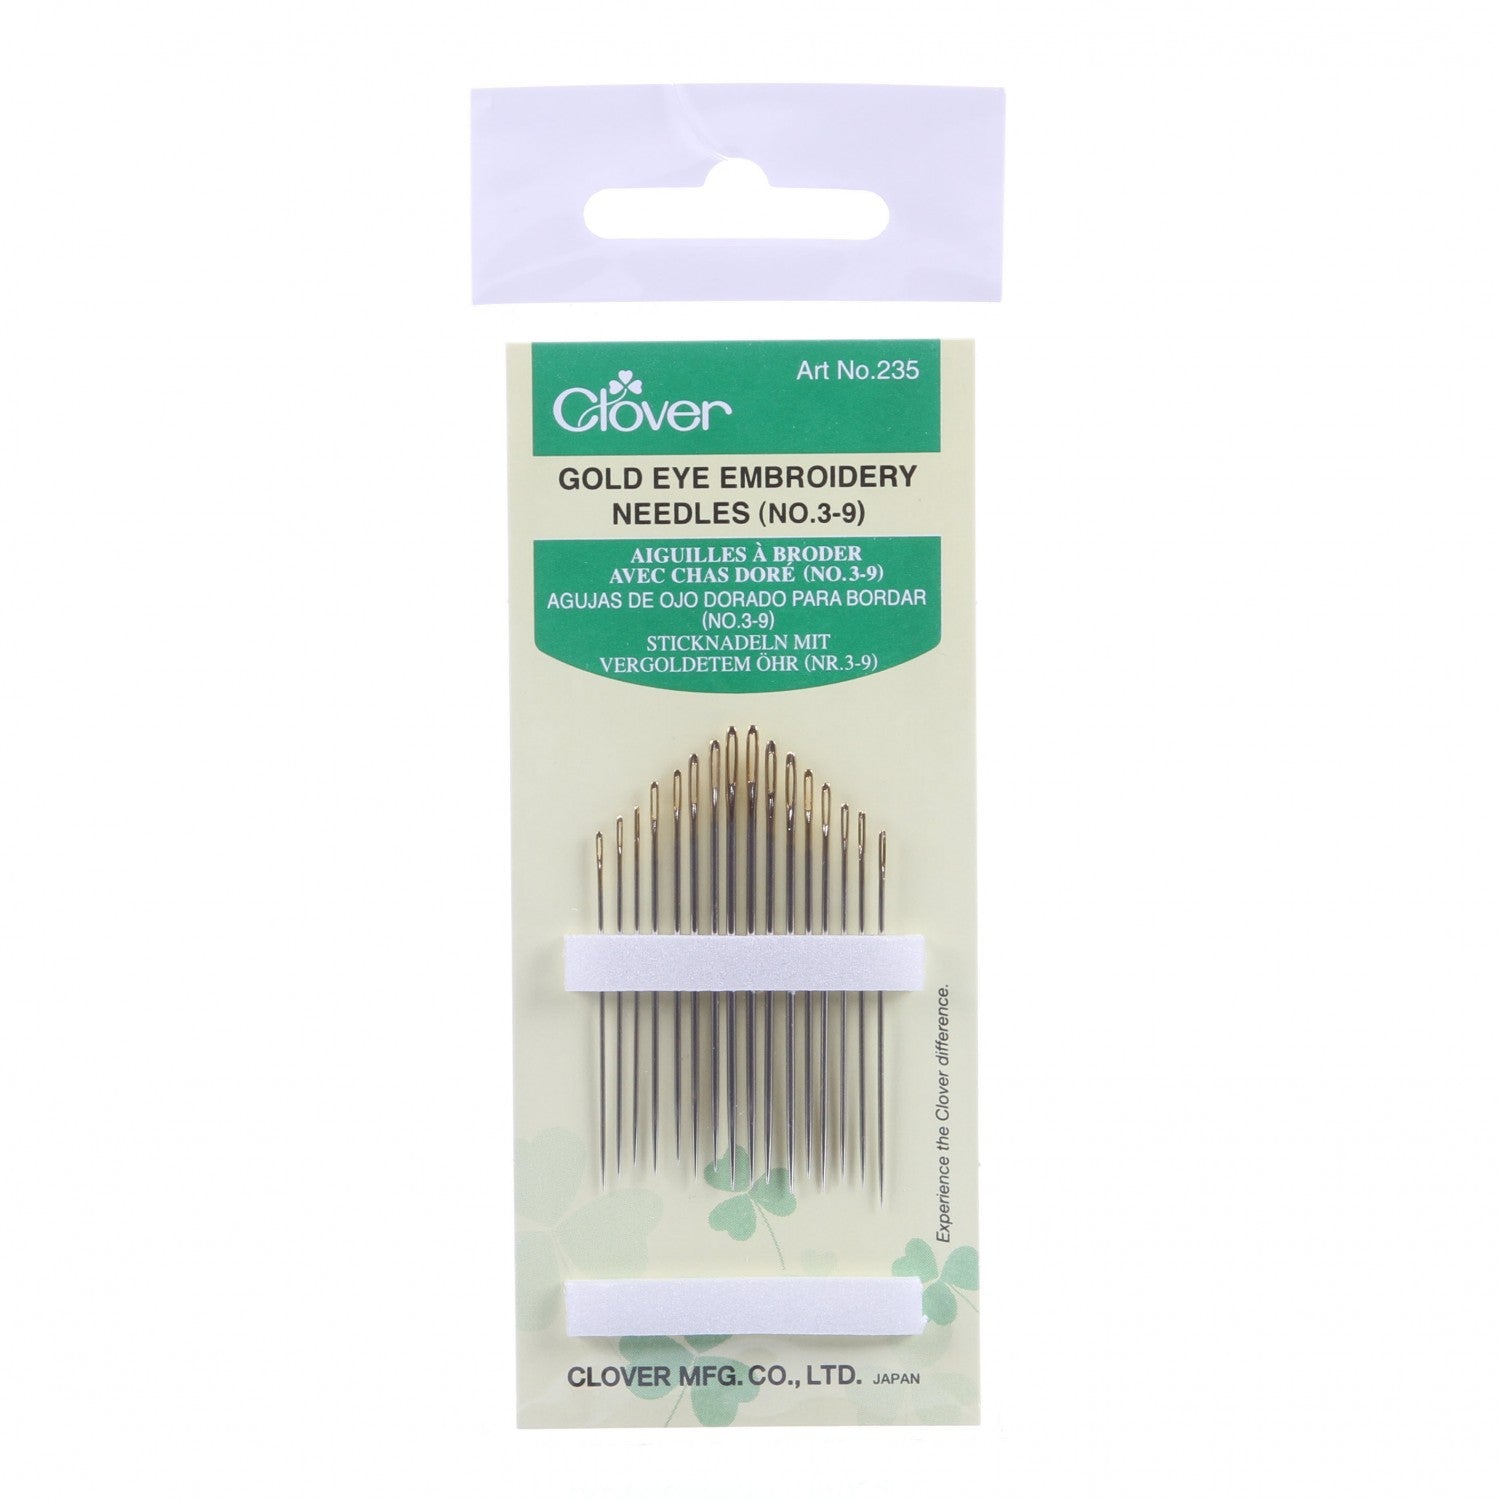 Gold Eye Embroidery Needles Size 3-9